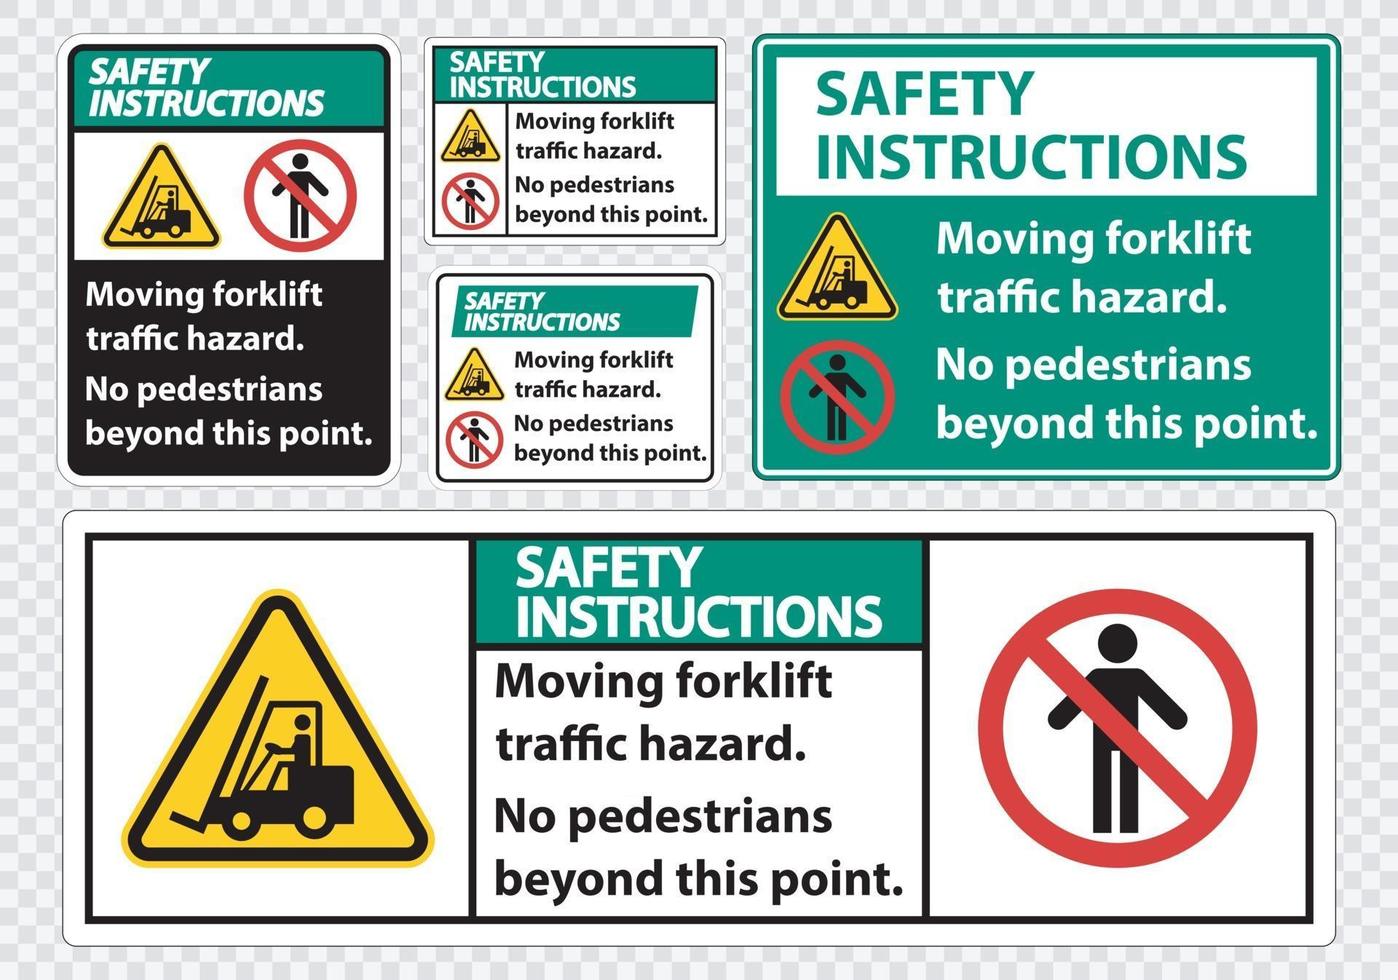 Moving forklift traffic hazard,No pedestrians beyond this point,Symbol Sign Isolate on transparent Background,Vector Illustration vector